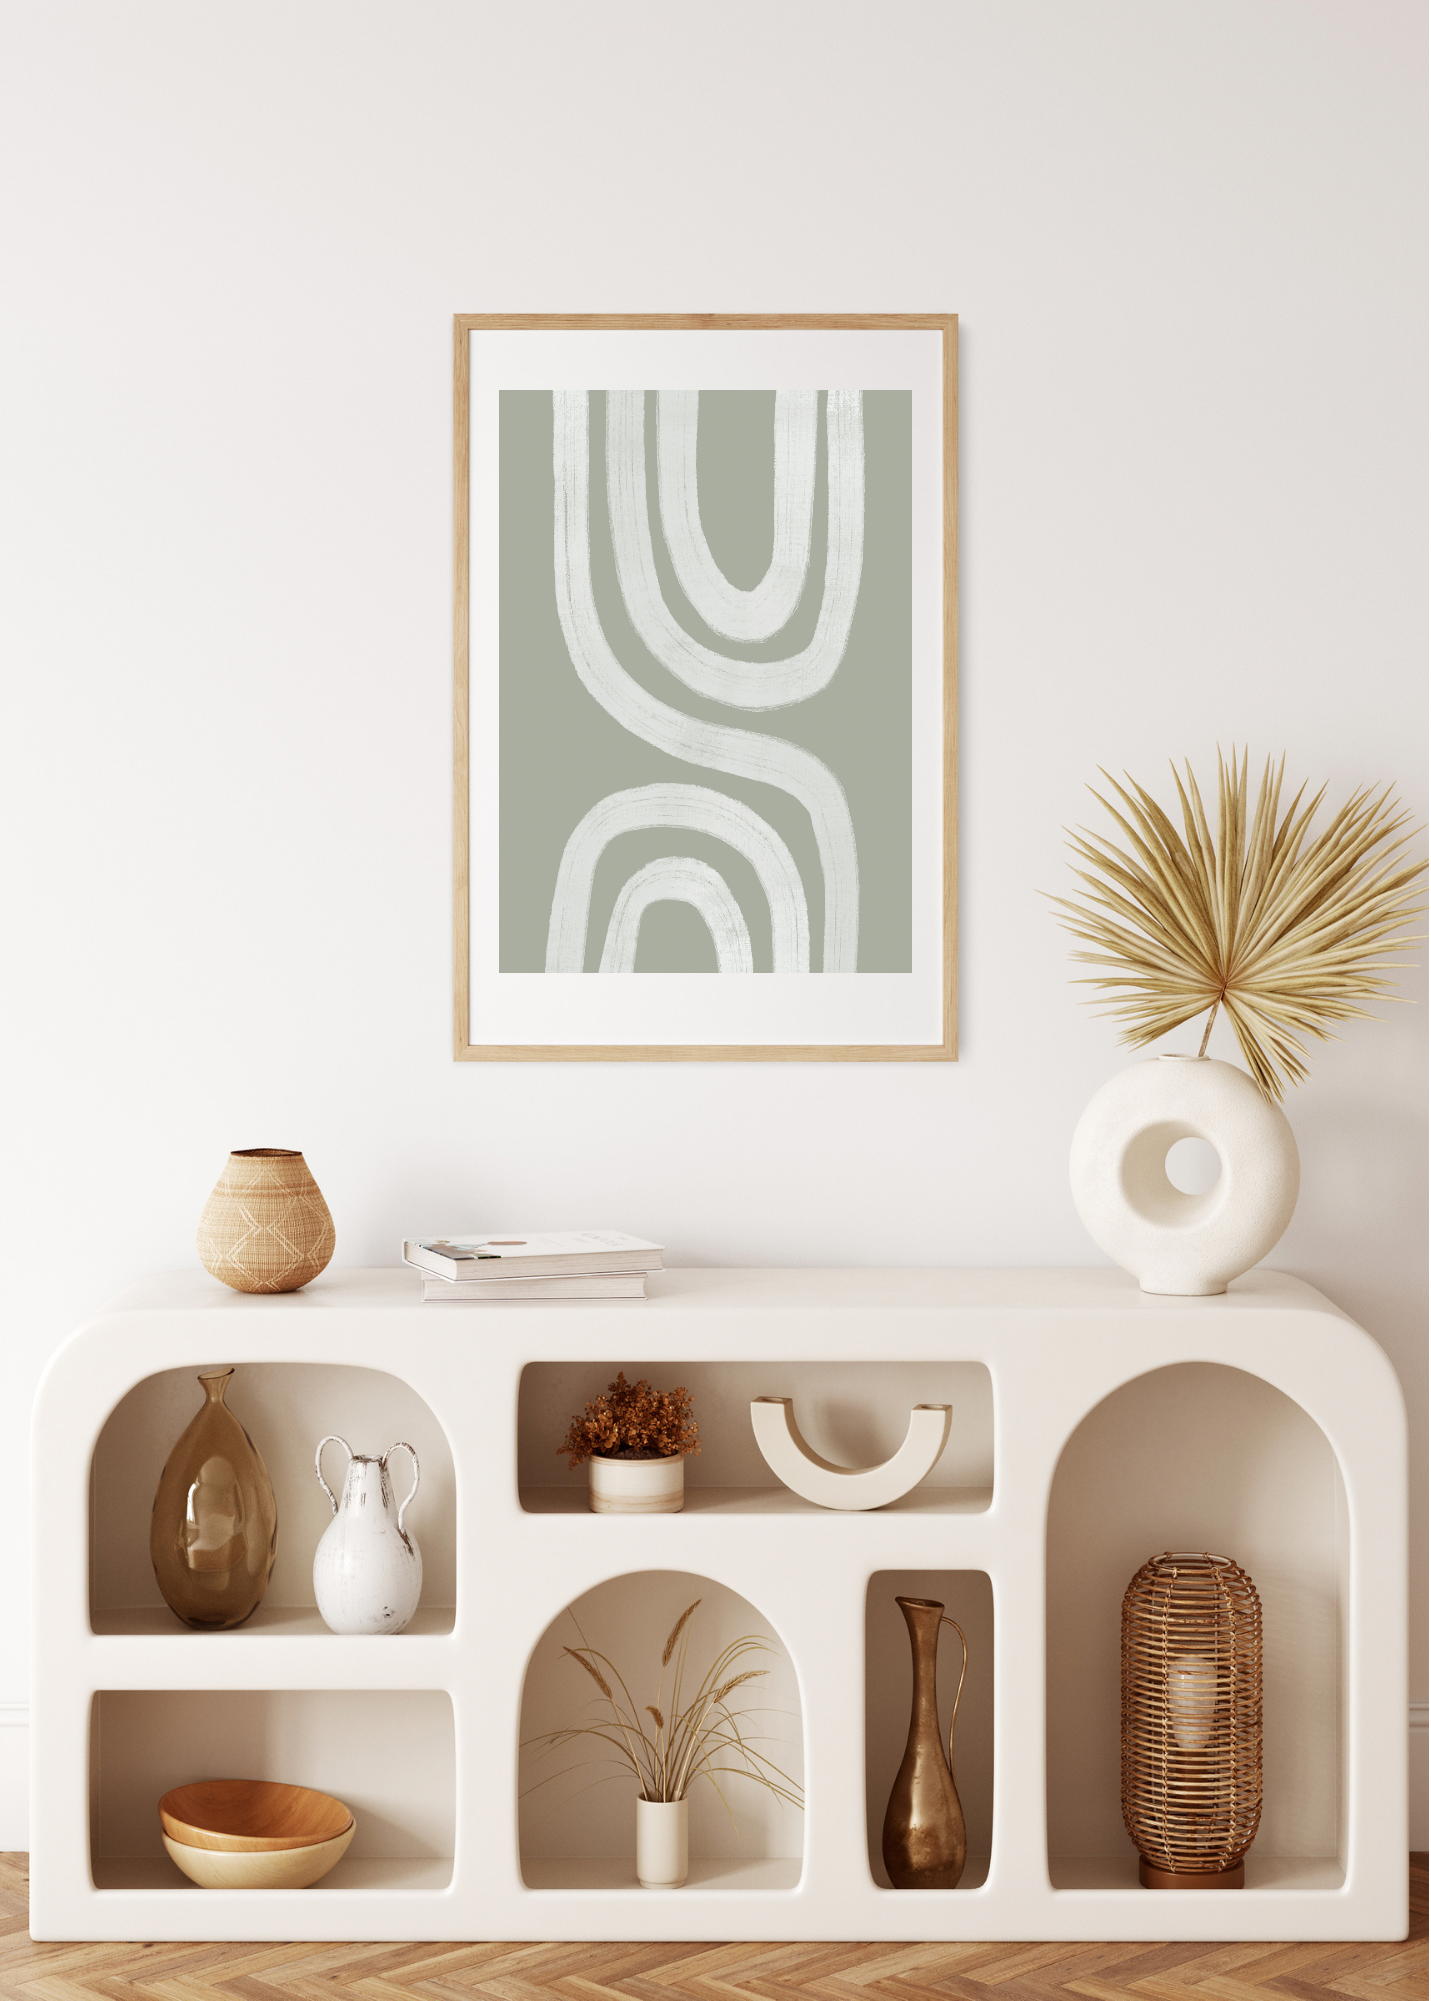 The Abstract Green Line print